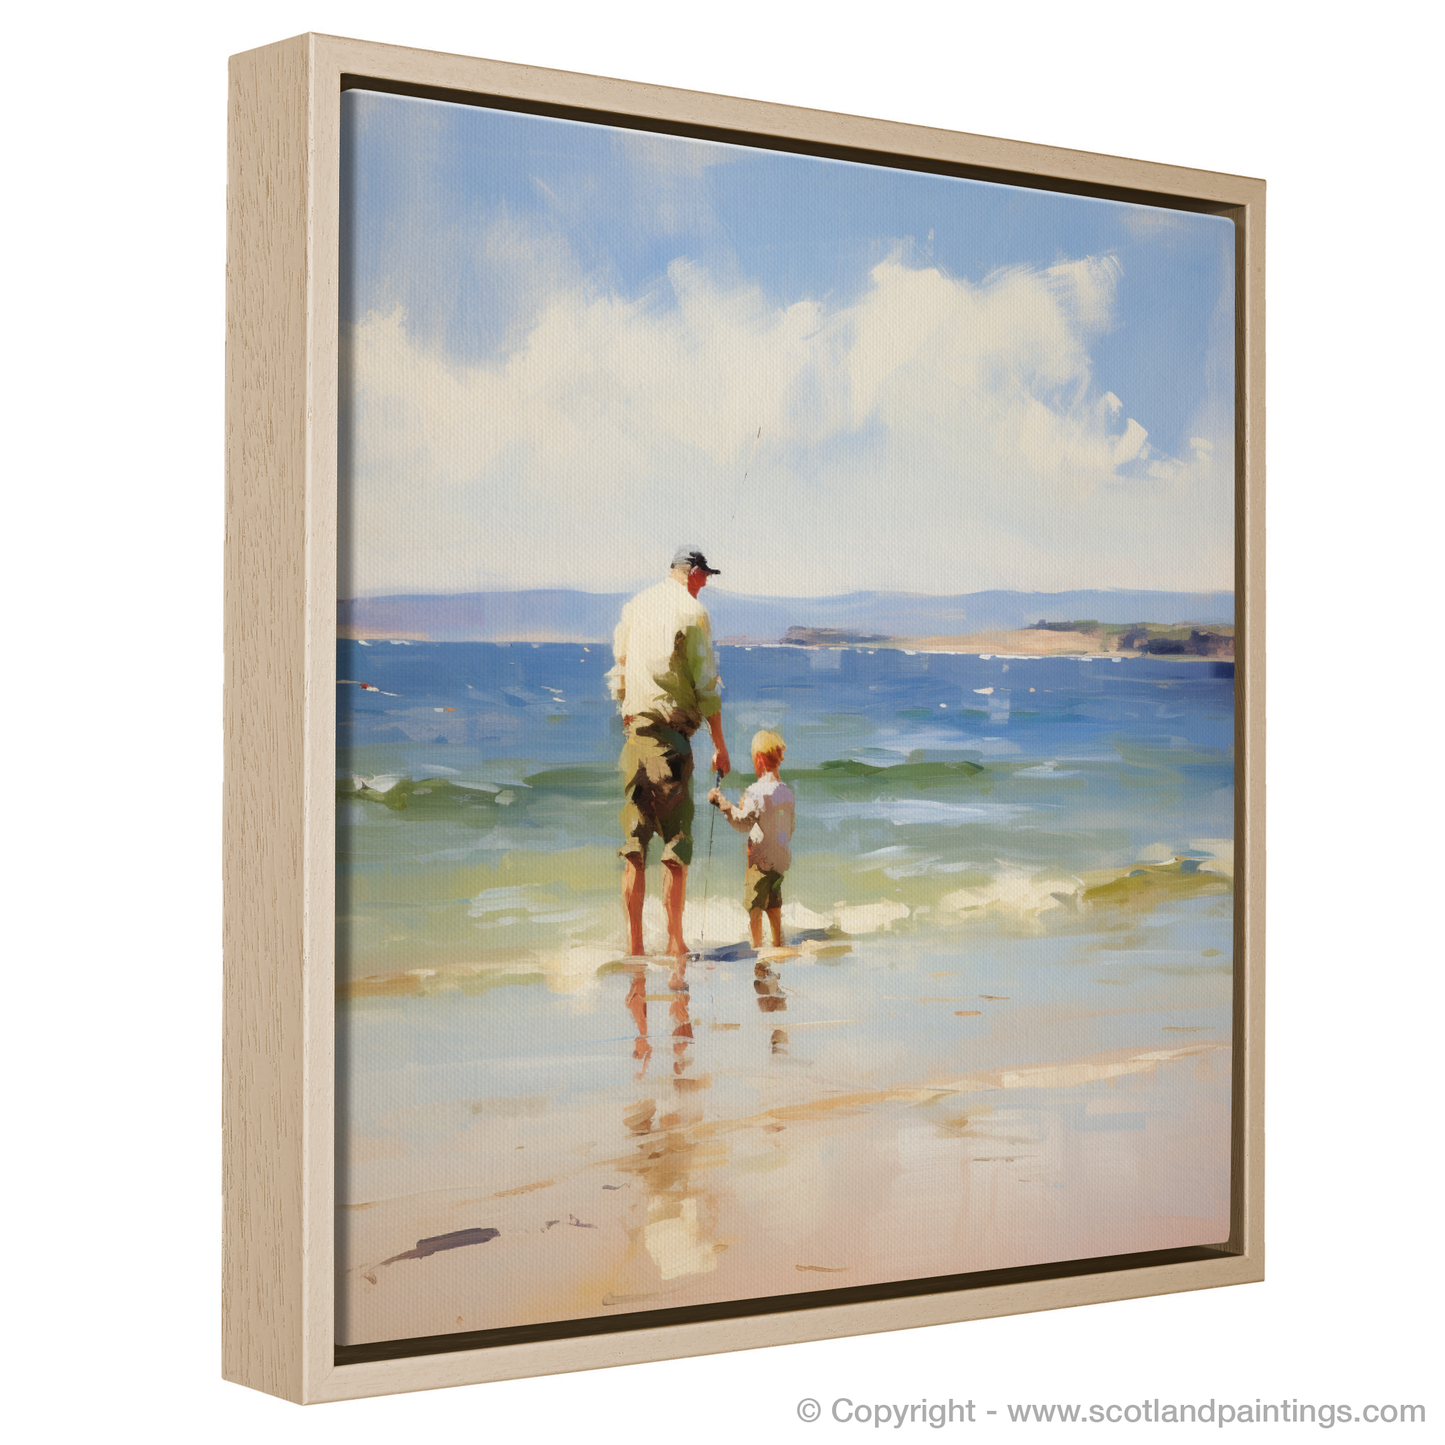 Painting and Art Print of A dad and son fishing at Rosemarkie Beach entitled "Fishing at Rosemarkie Beach: Father and Son Bonding in Nature".